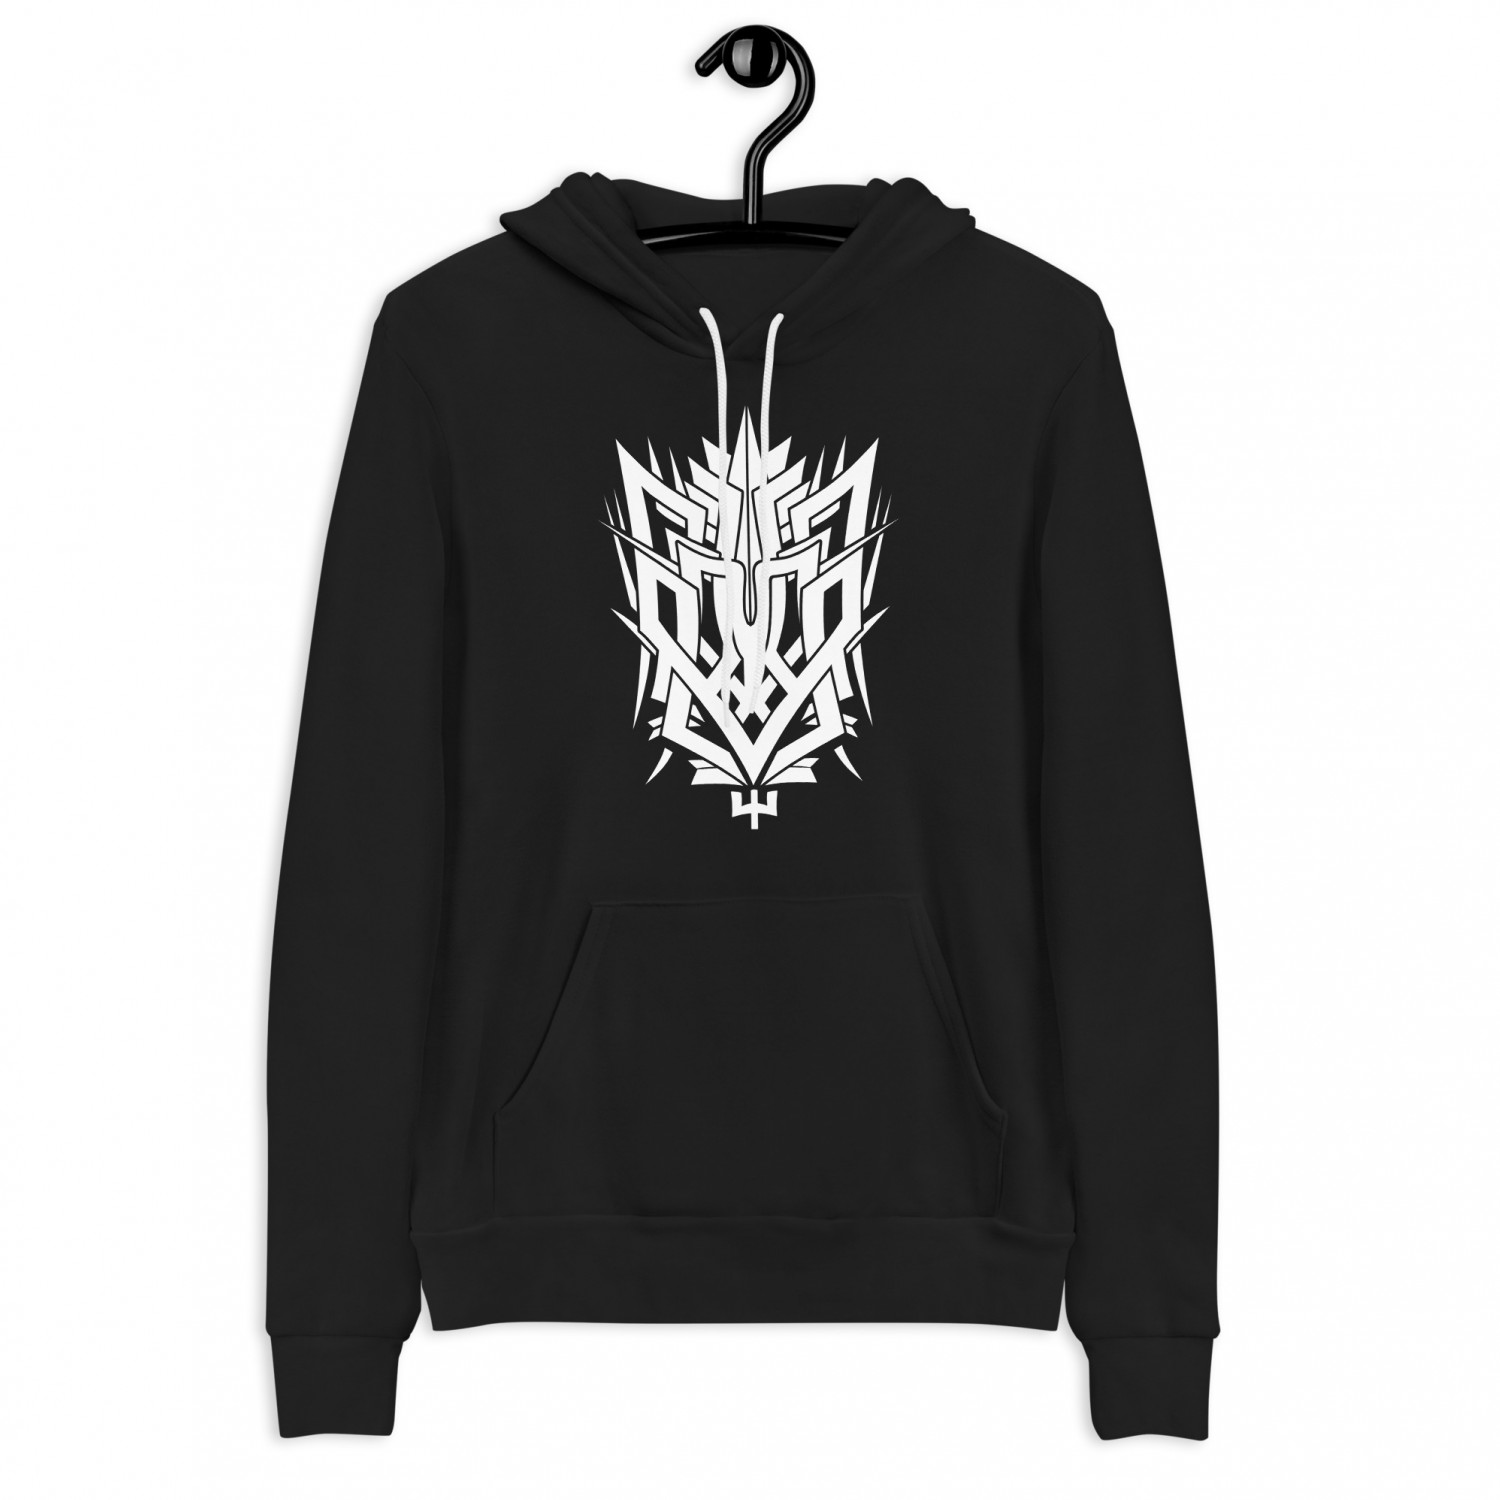 HOODIE WITH A TRIDENT - THE EMBLEM OF UKRAINE